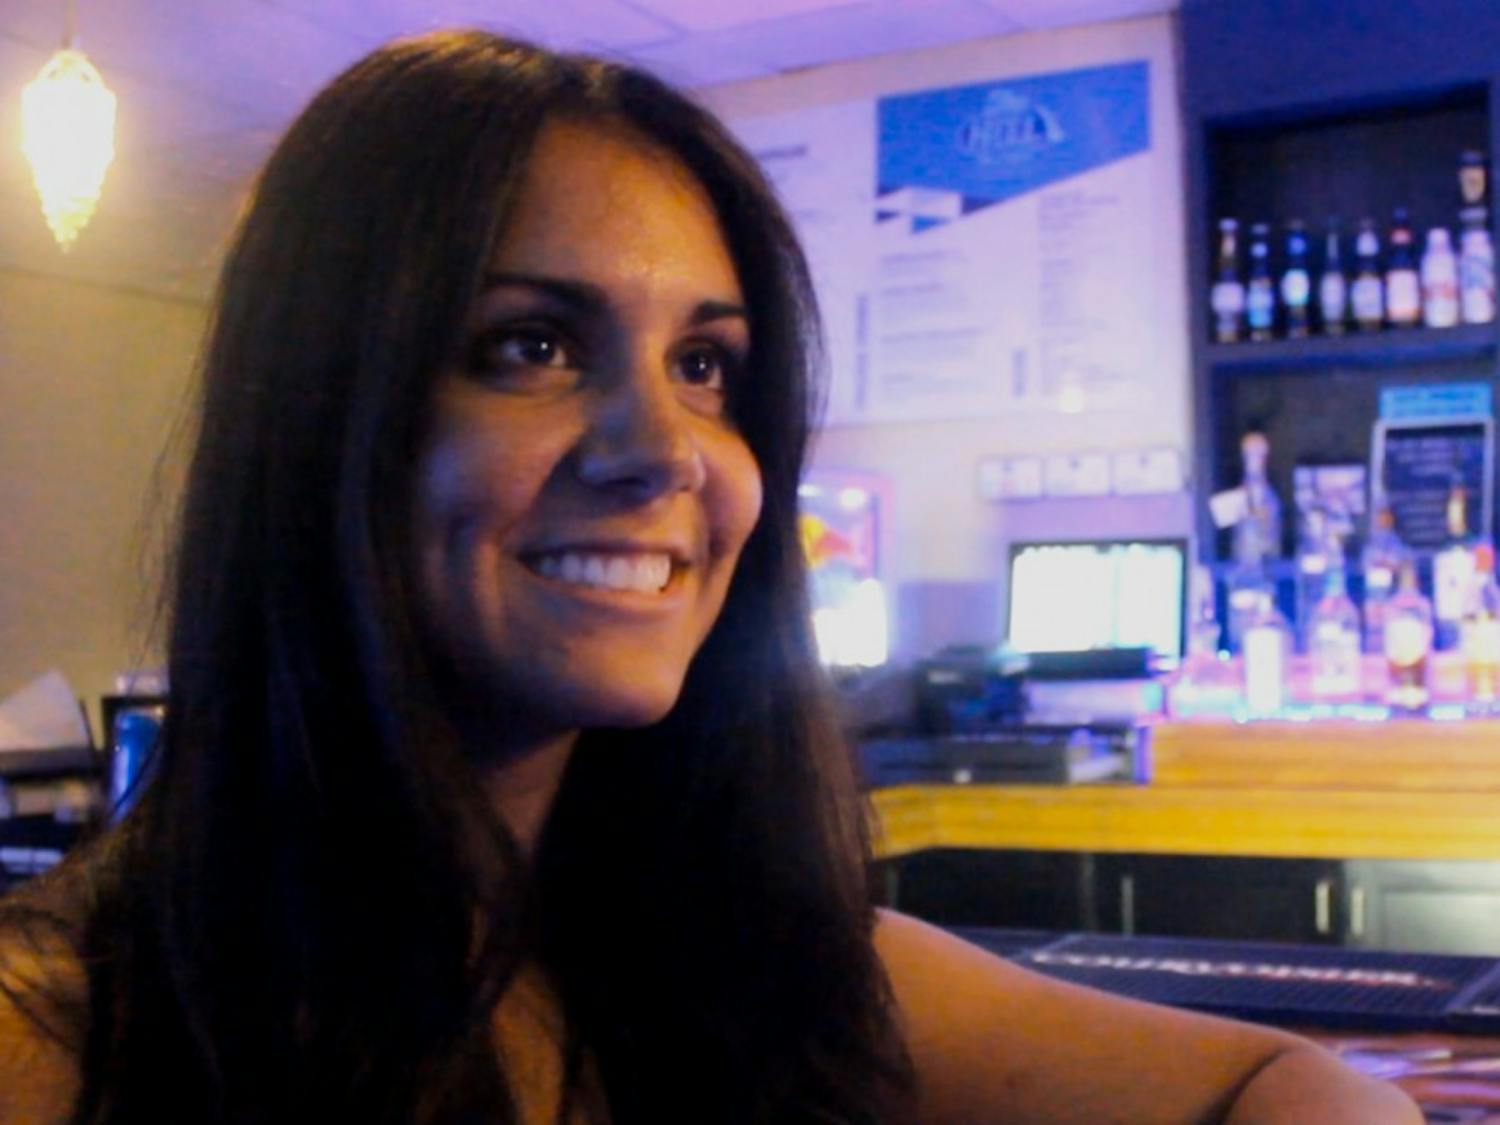 Giuli Lurito is a senior at UNC and a bartender at The Heel.